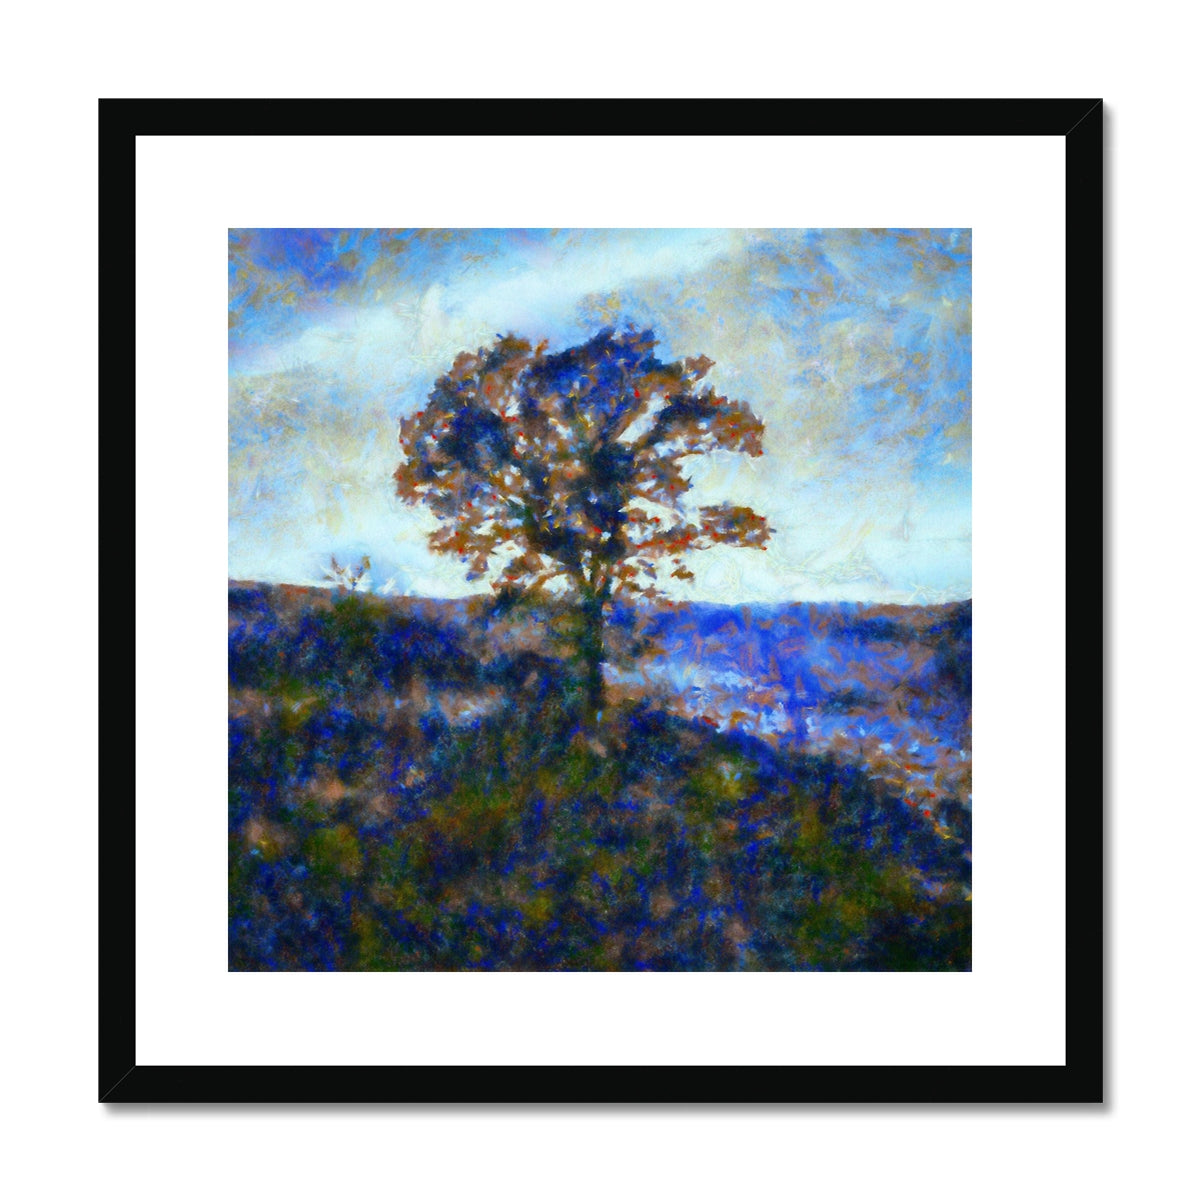 A Winter Highland Tree Painting | Framed & Mounted Prints From Scotland-Framed & Mounted Prints-Scottish Highlands & Lowlands Art Gallery-20"x20"-Black Frame-Paintings, Prints, Homeware, Art Gifts From Scotland By Scottish Artist Kevin Hunter